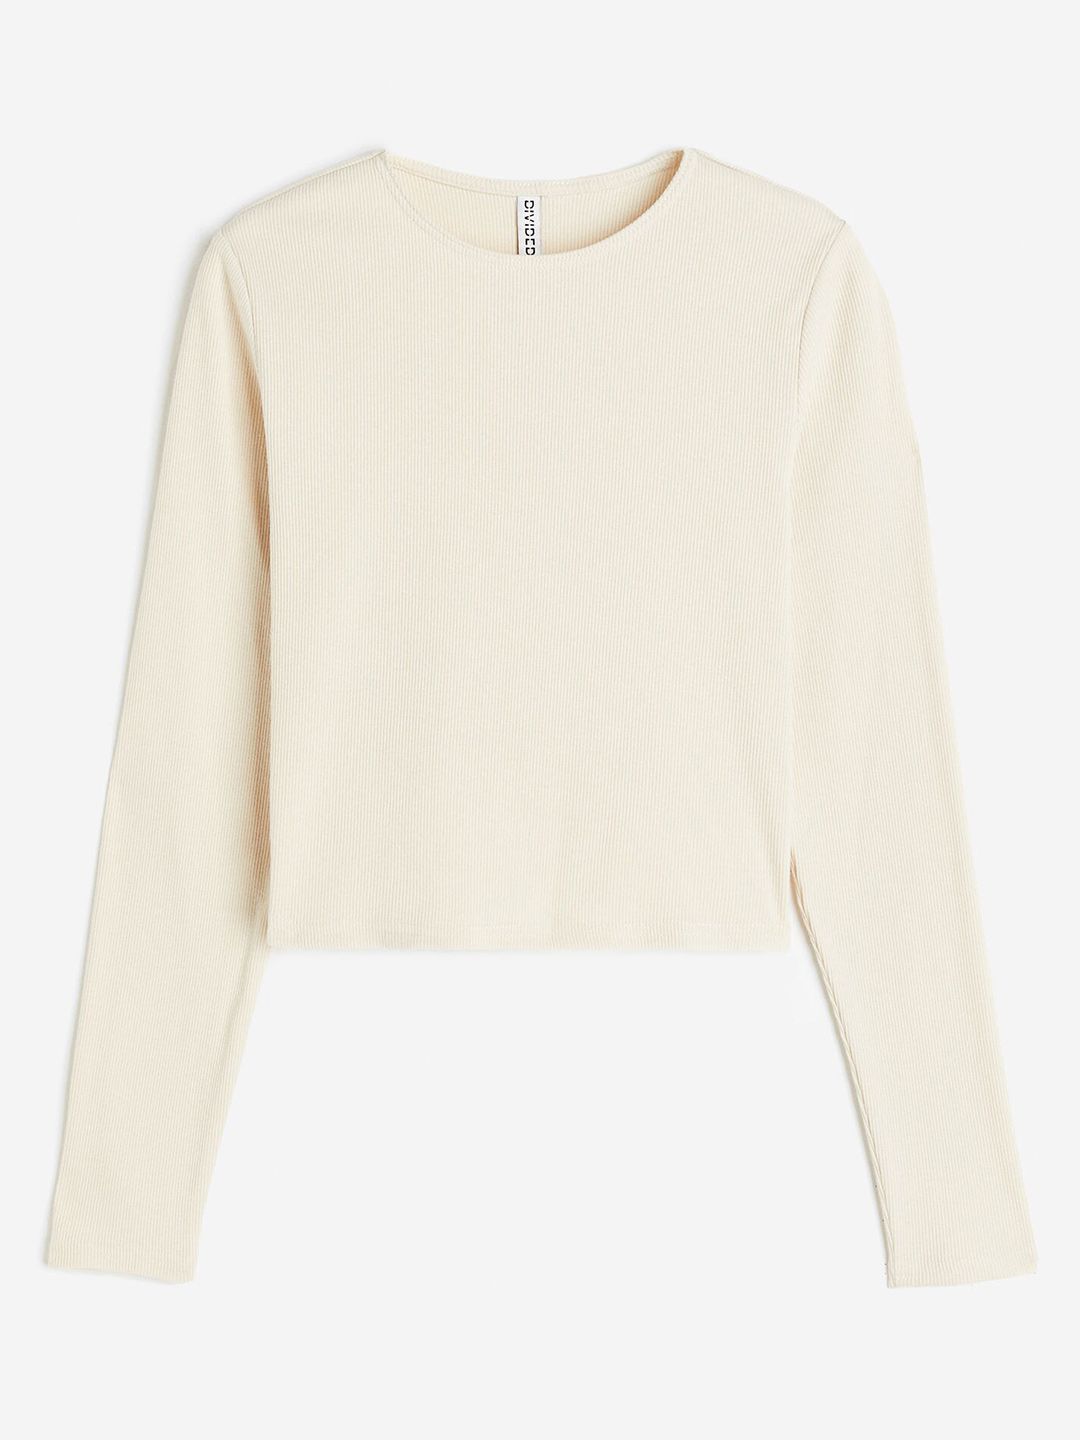 H&M Women Ribbed Top Price in India